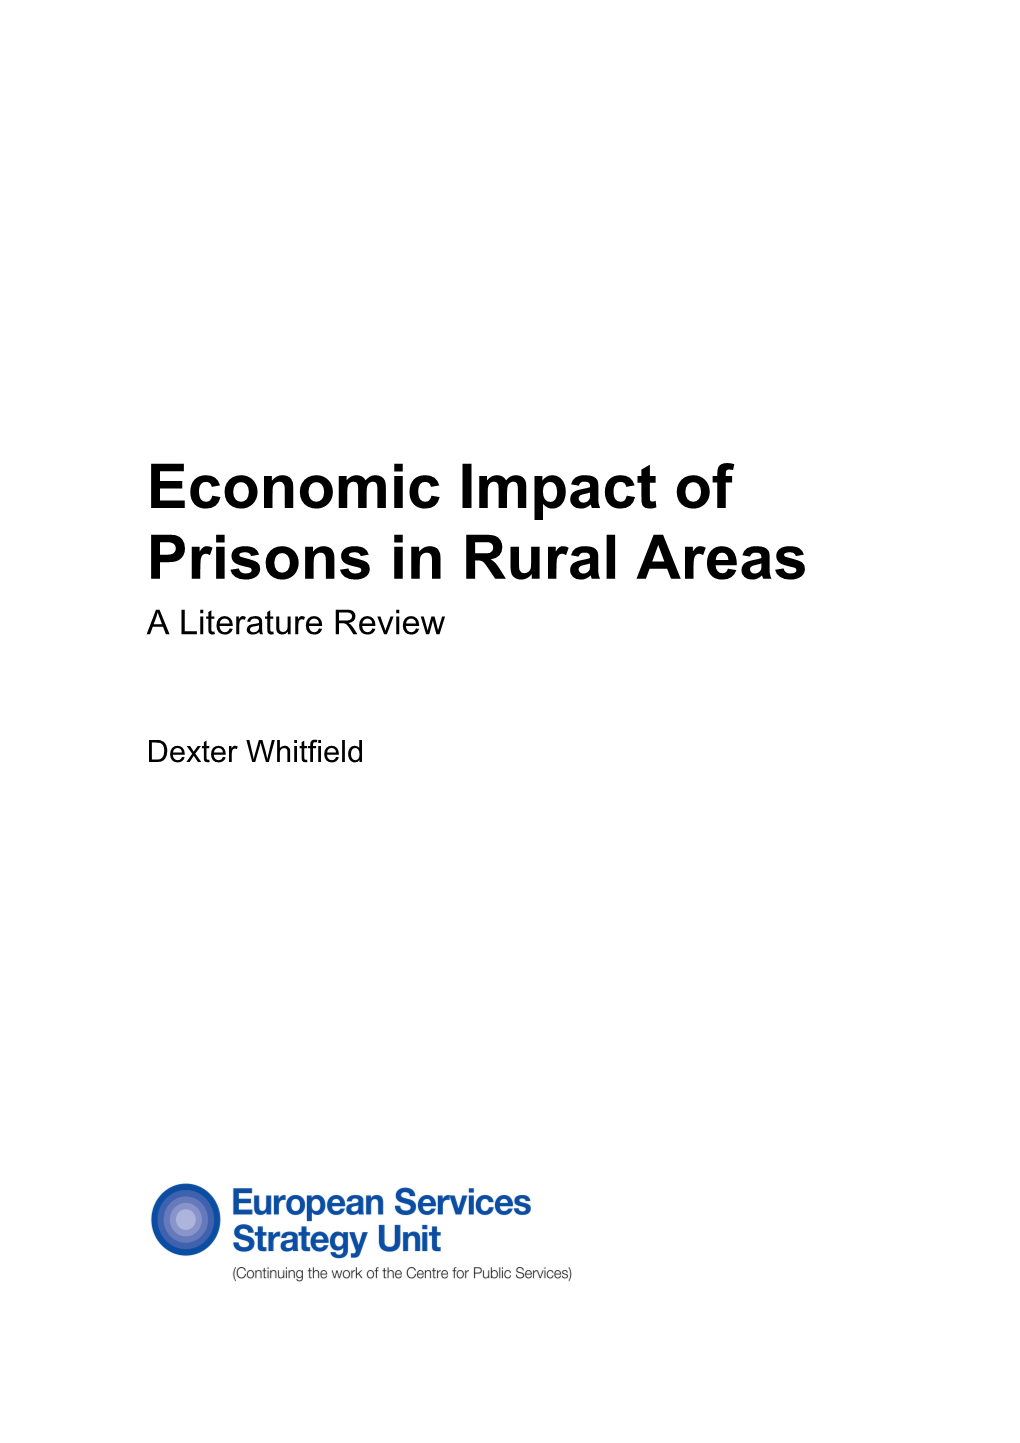 Economic Impact of Prisons in Rural Areas